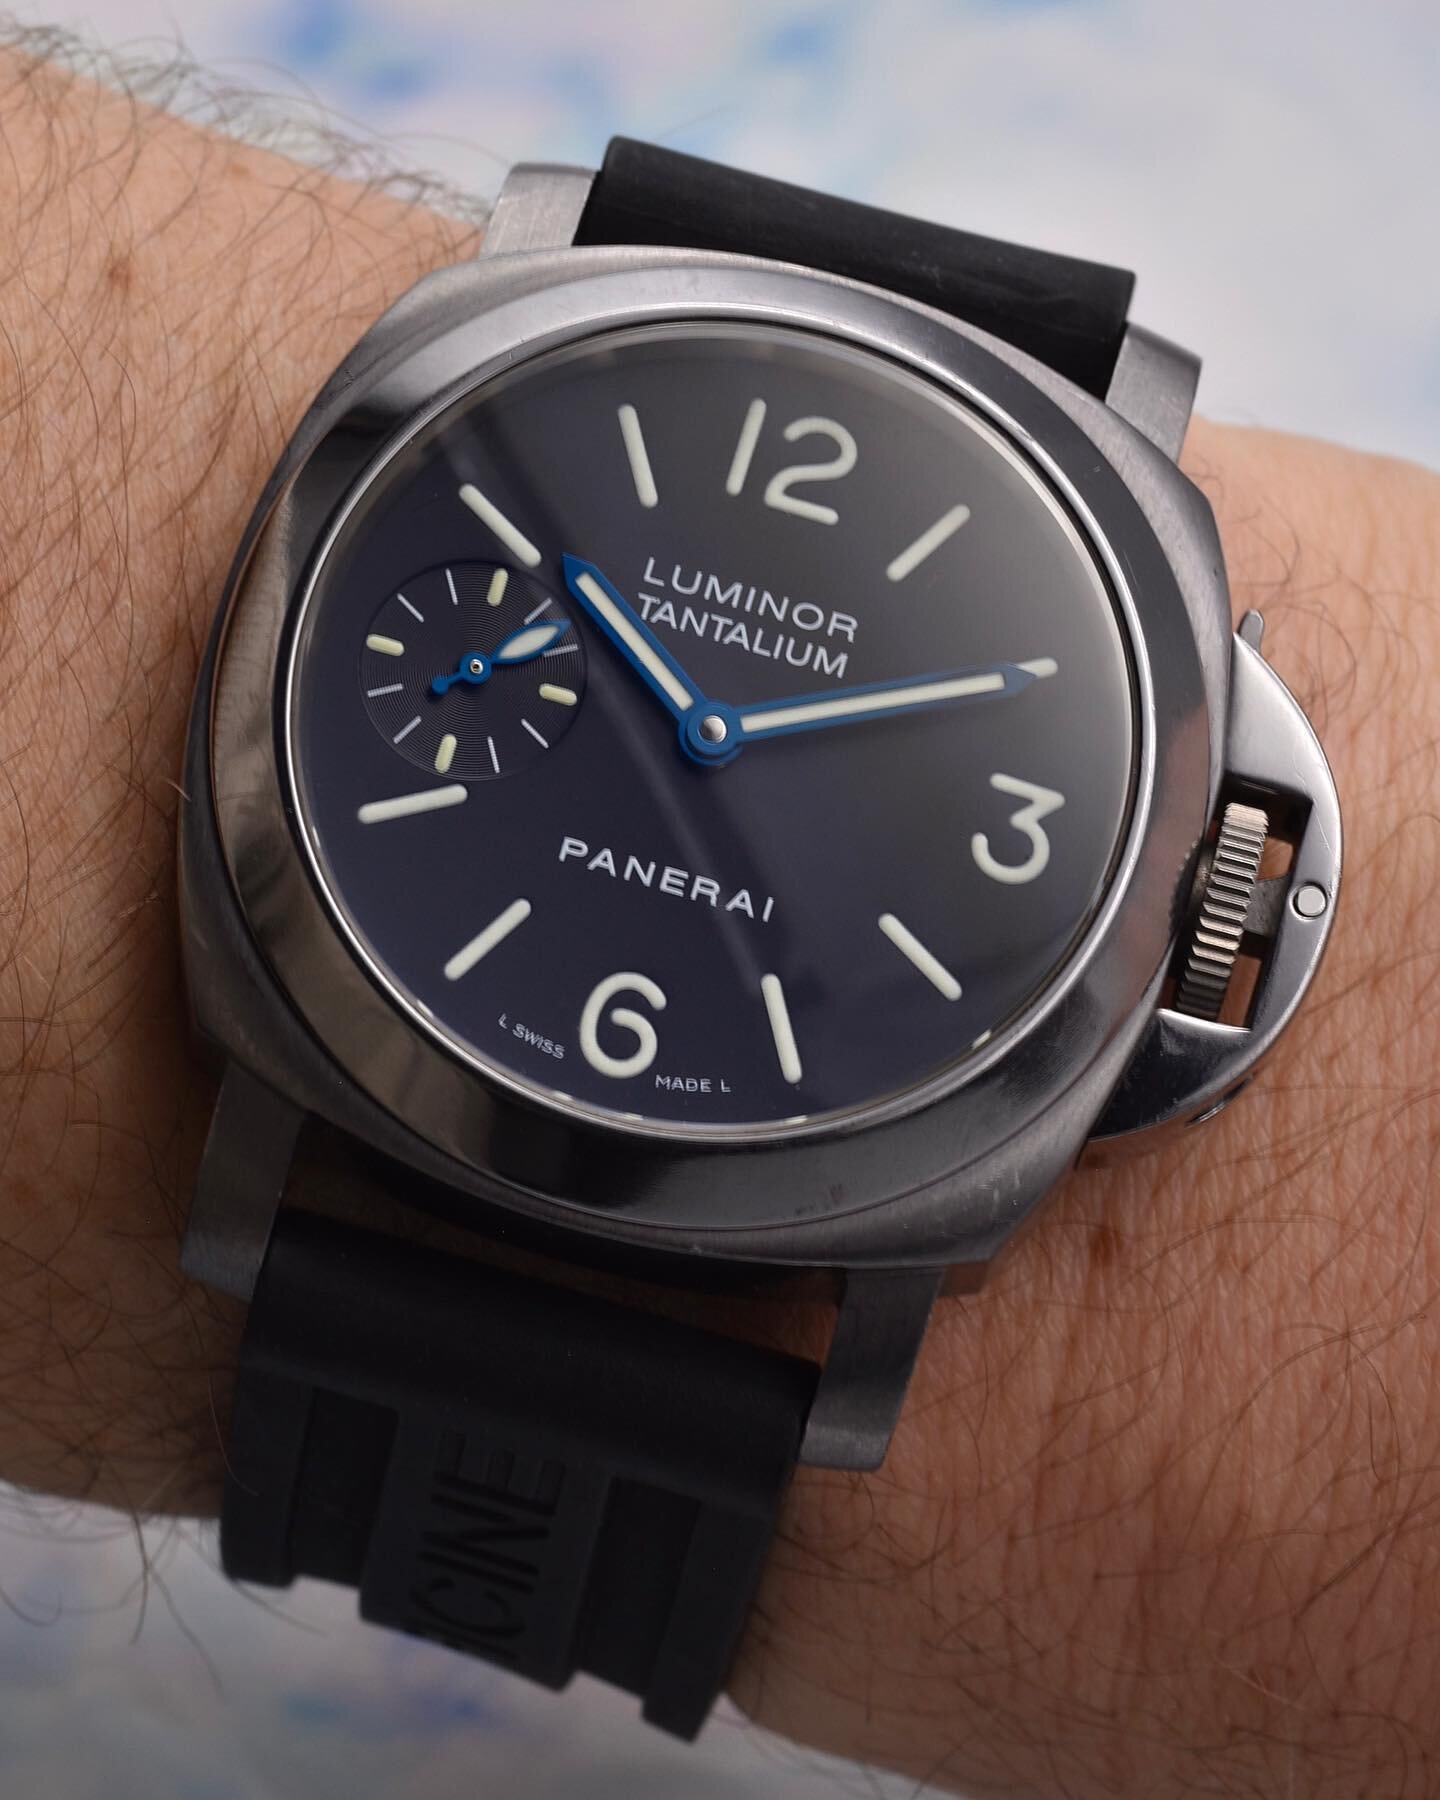 Check out this Panerai Luminor Tantalium PAM172 💥

In 2003, Panerai released a special model made from a very special material. Limited to just 300 pieces, this Luminor is made up of Tantalum; a rare, hard, blue-grey metal that is highly corrosion-r